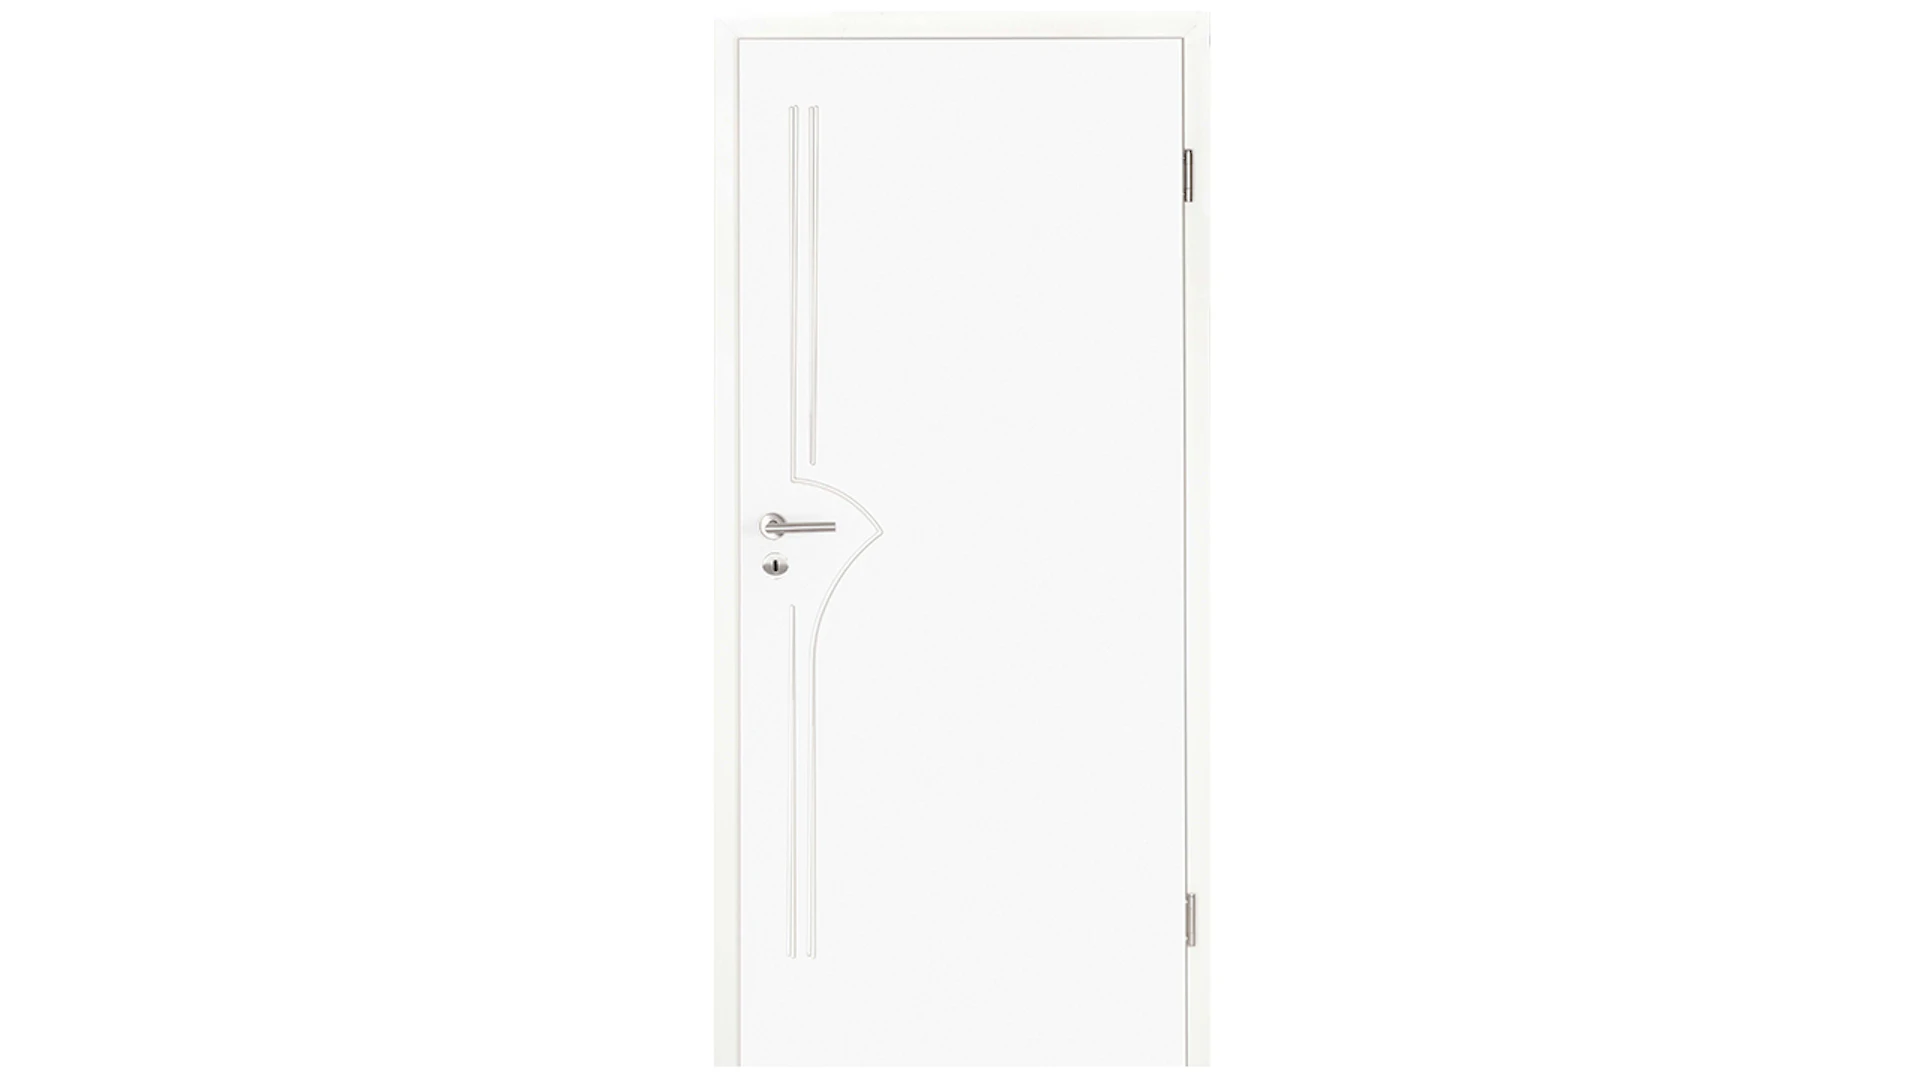 planeo interior door lacquer 2.0 - Kalle 9016 white lacquer 1985 x 860 mm DIN R - round RSP hinge 3-t